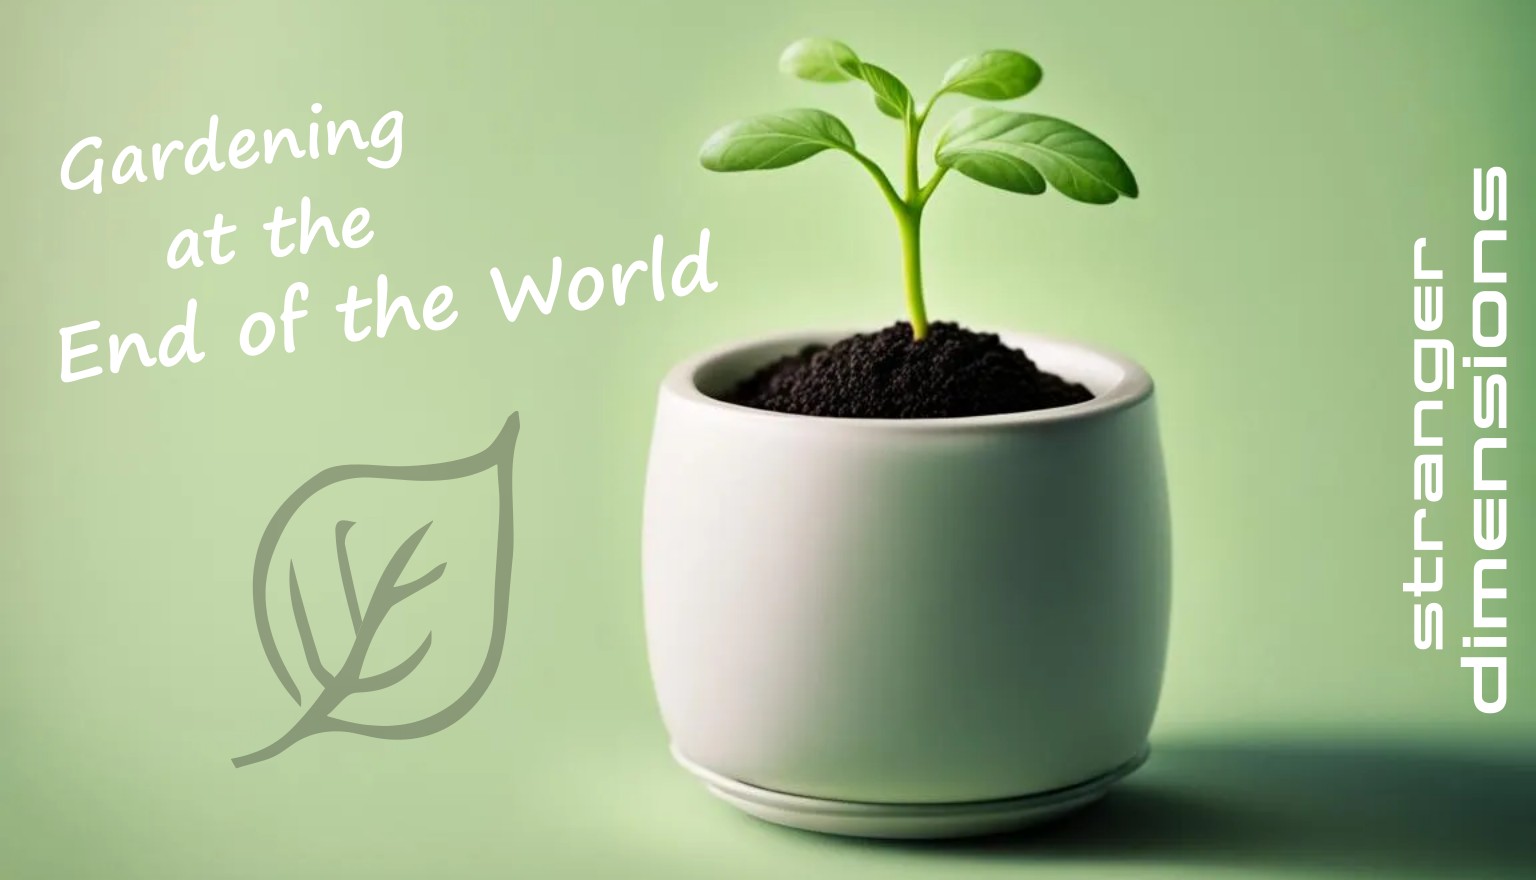 A potted sprout next to the words Gardening at the End of the World